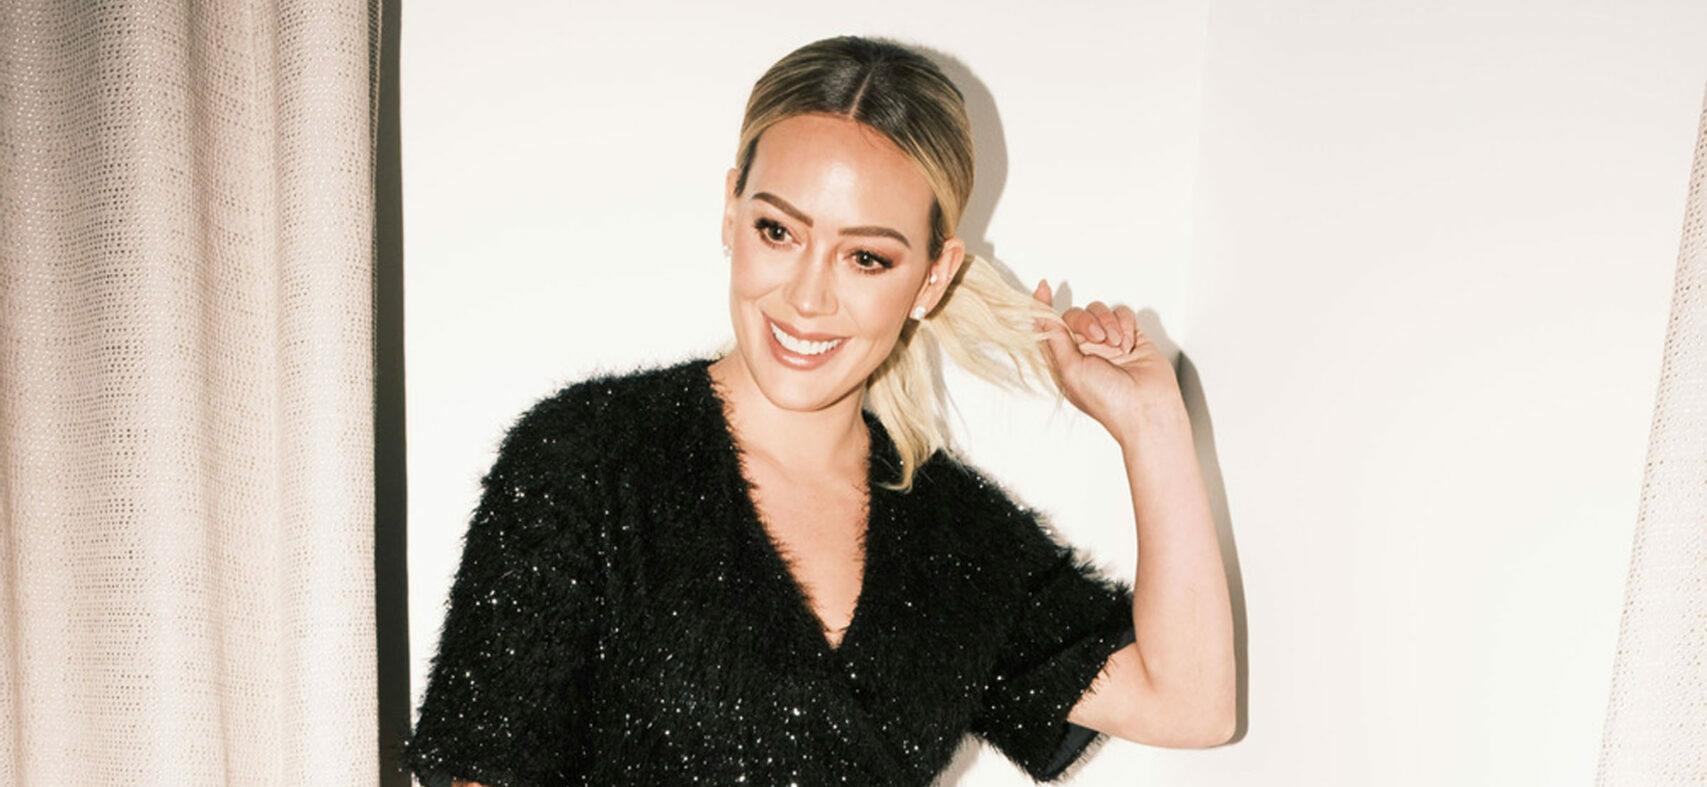 Hilary Duff shows off her shapely legs and dazzles in festive tinsel Smash Tess romper